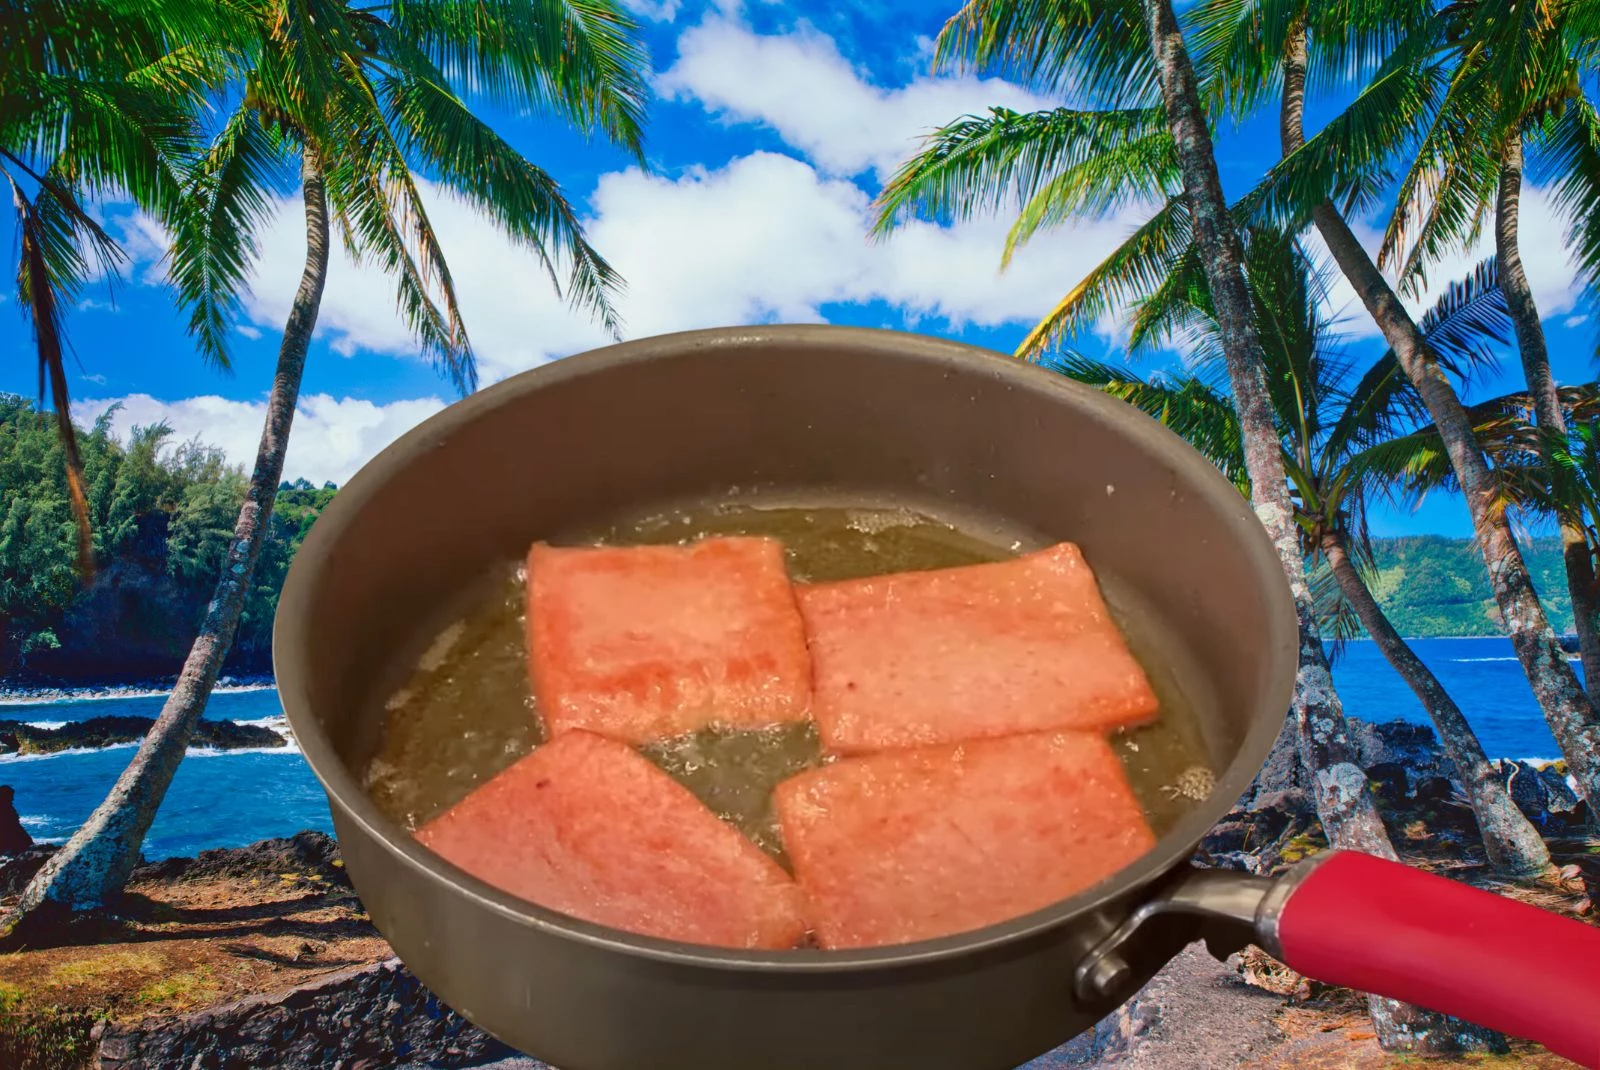 Minnesota Company Partners With Hawaii For Cool New Spam-Youtube / Getty Thinkstock